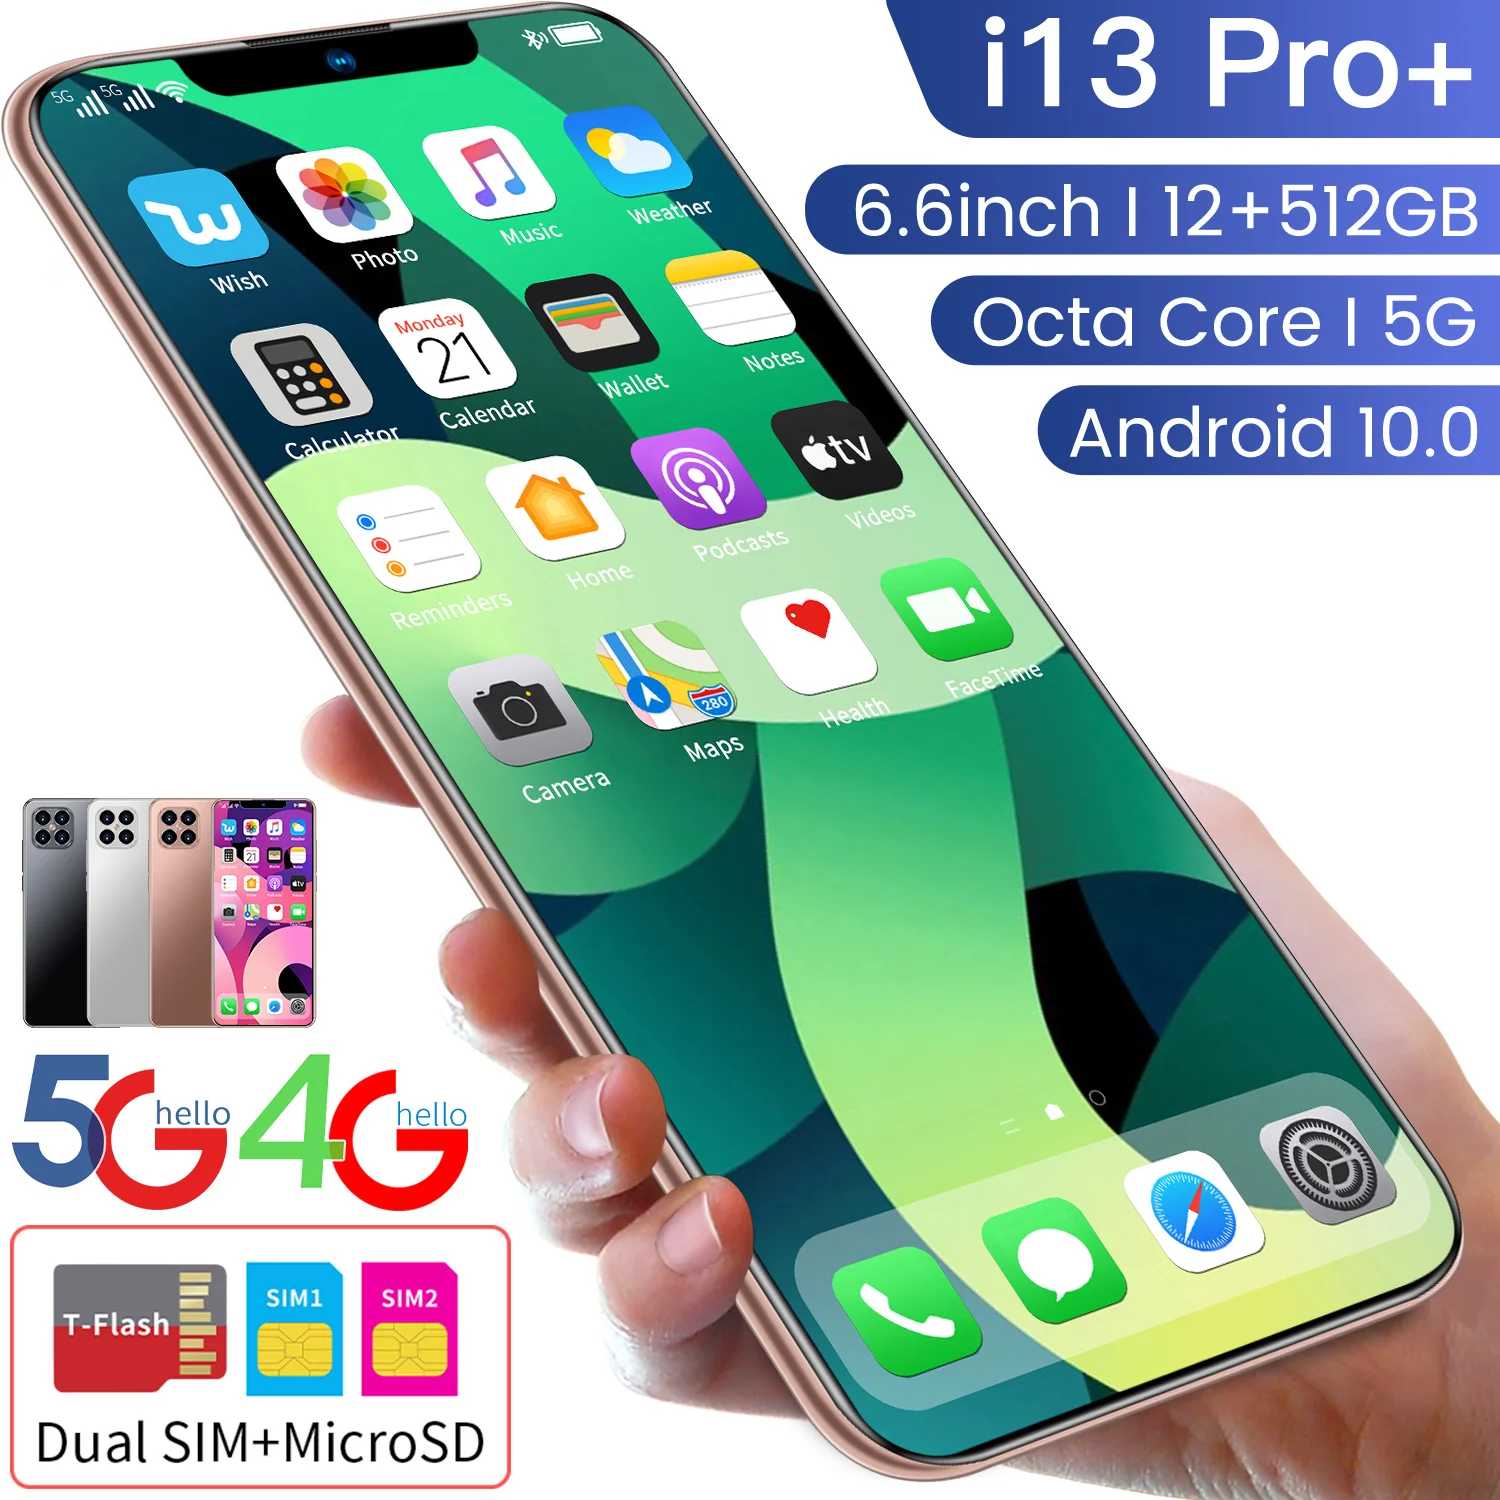 

2021 New Fashion i13 Pro+ 6.1 inch Android Smartphones 8GB+256GB 10-Core 5G LET Cellphones 4 Camera cell phone case